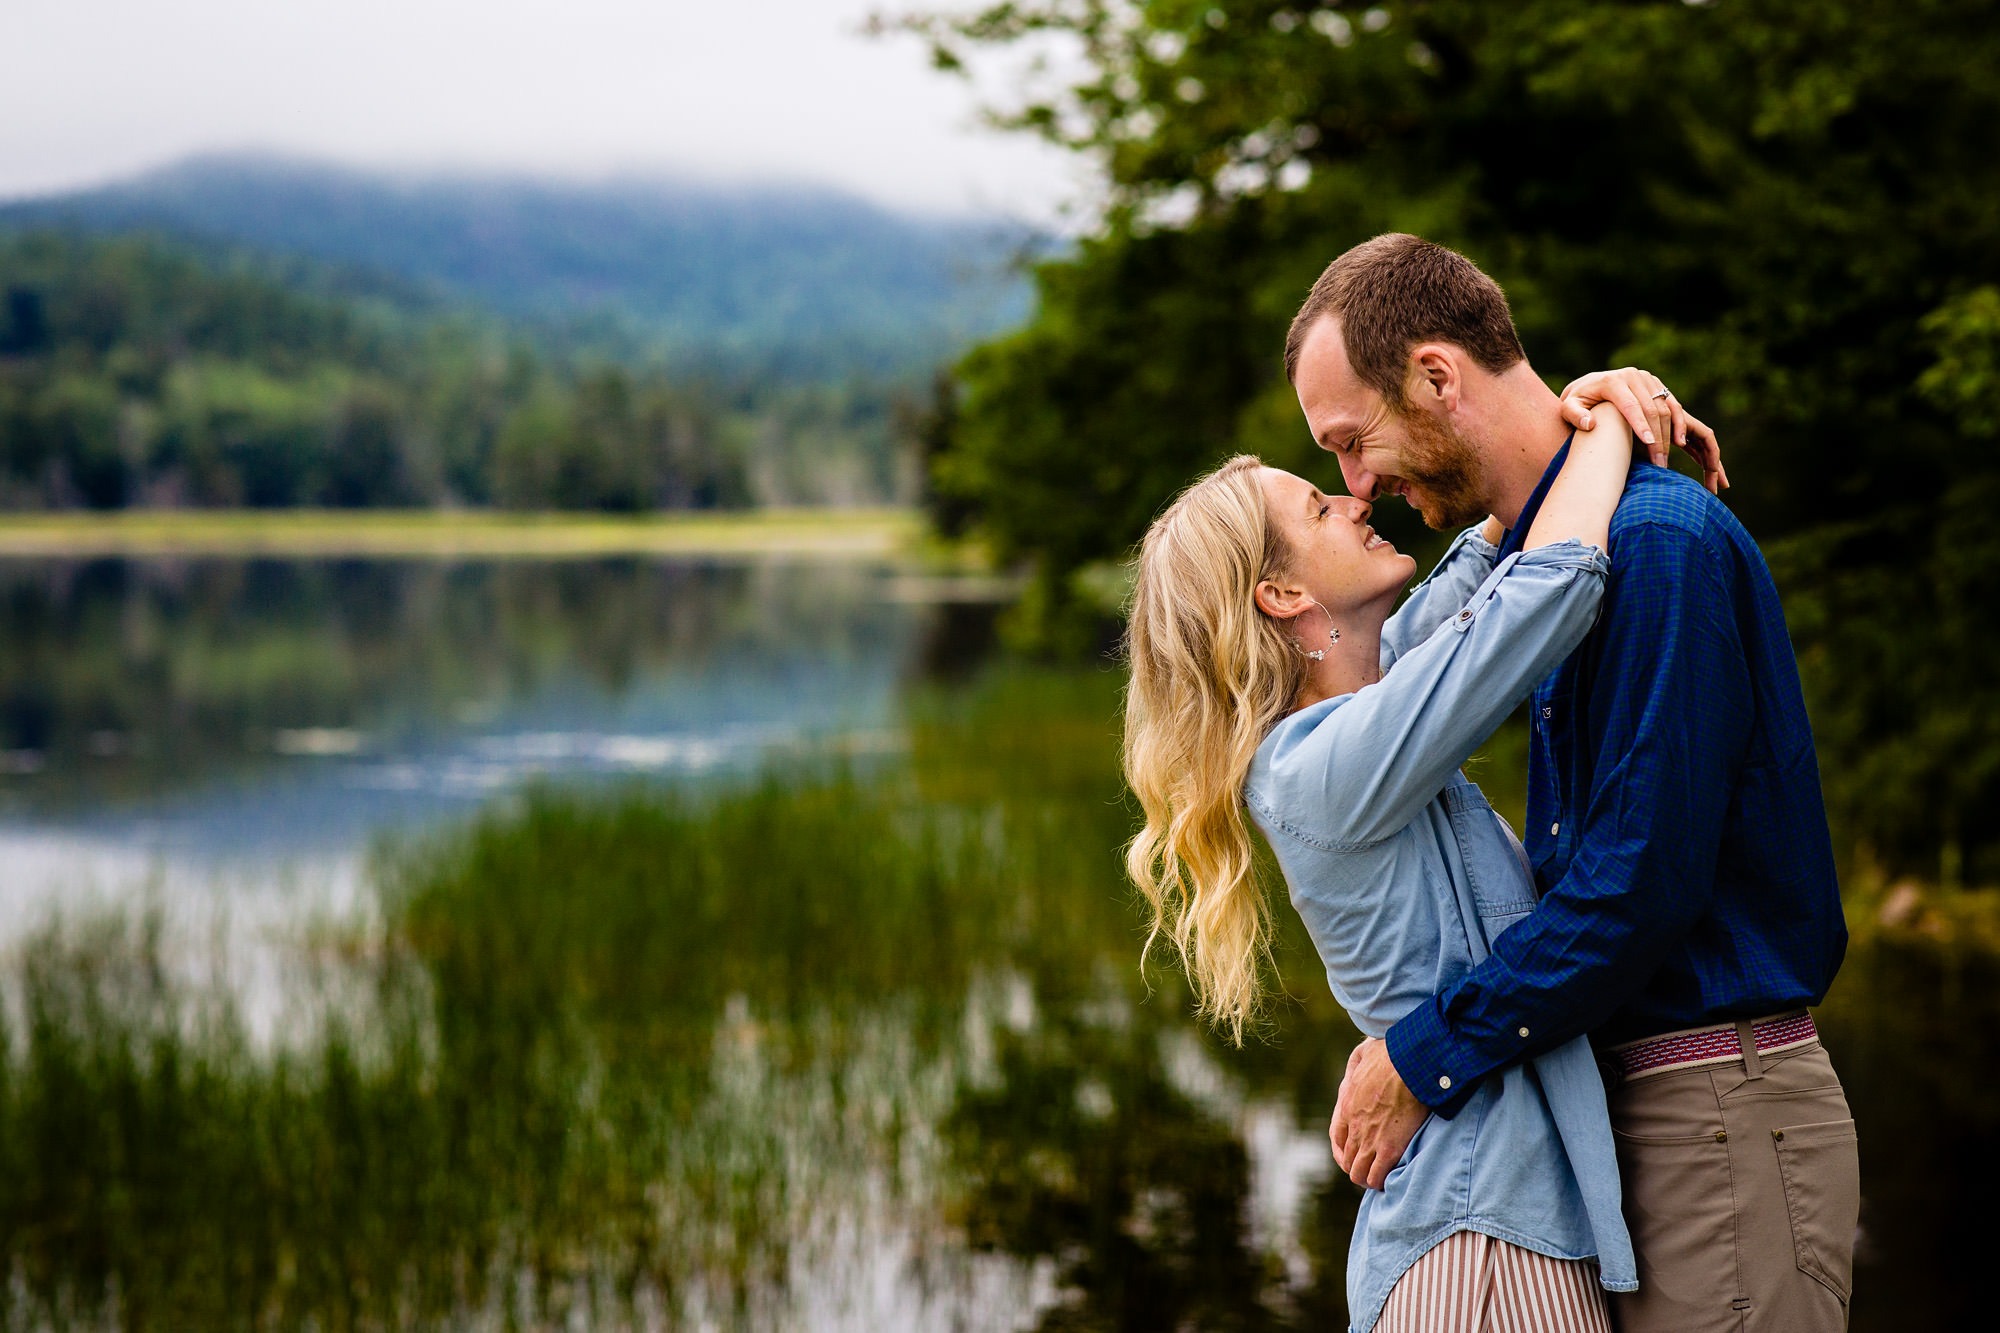 Engagement portraits taken at Little Long Pond in Northeast Harbor, Maine